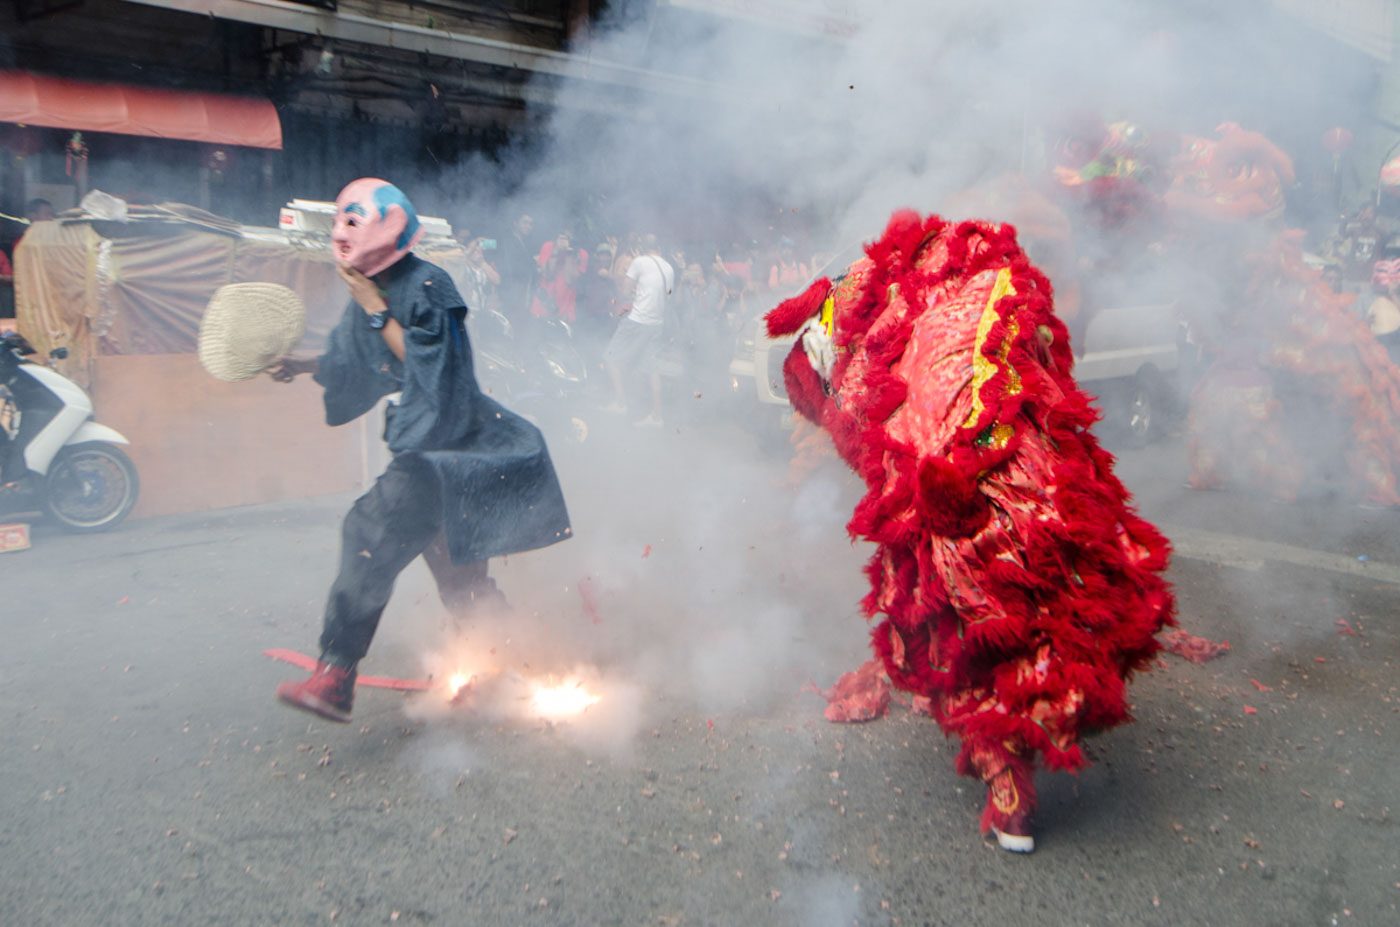 FIRECRACKERS. The festivities won't be complete without firecrackers. Photo by Rob Reyes/Rappler   